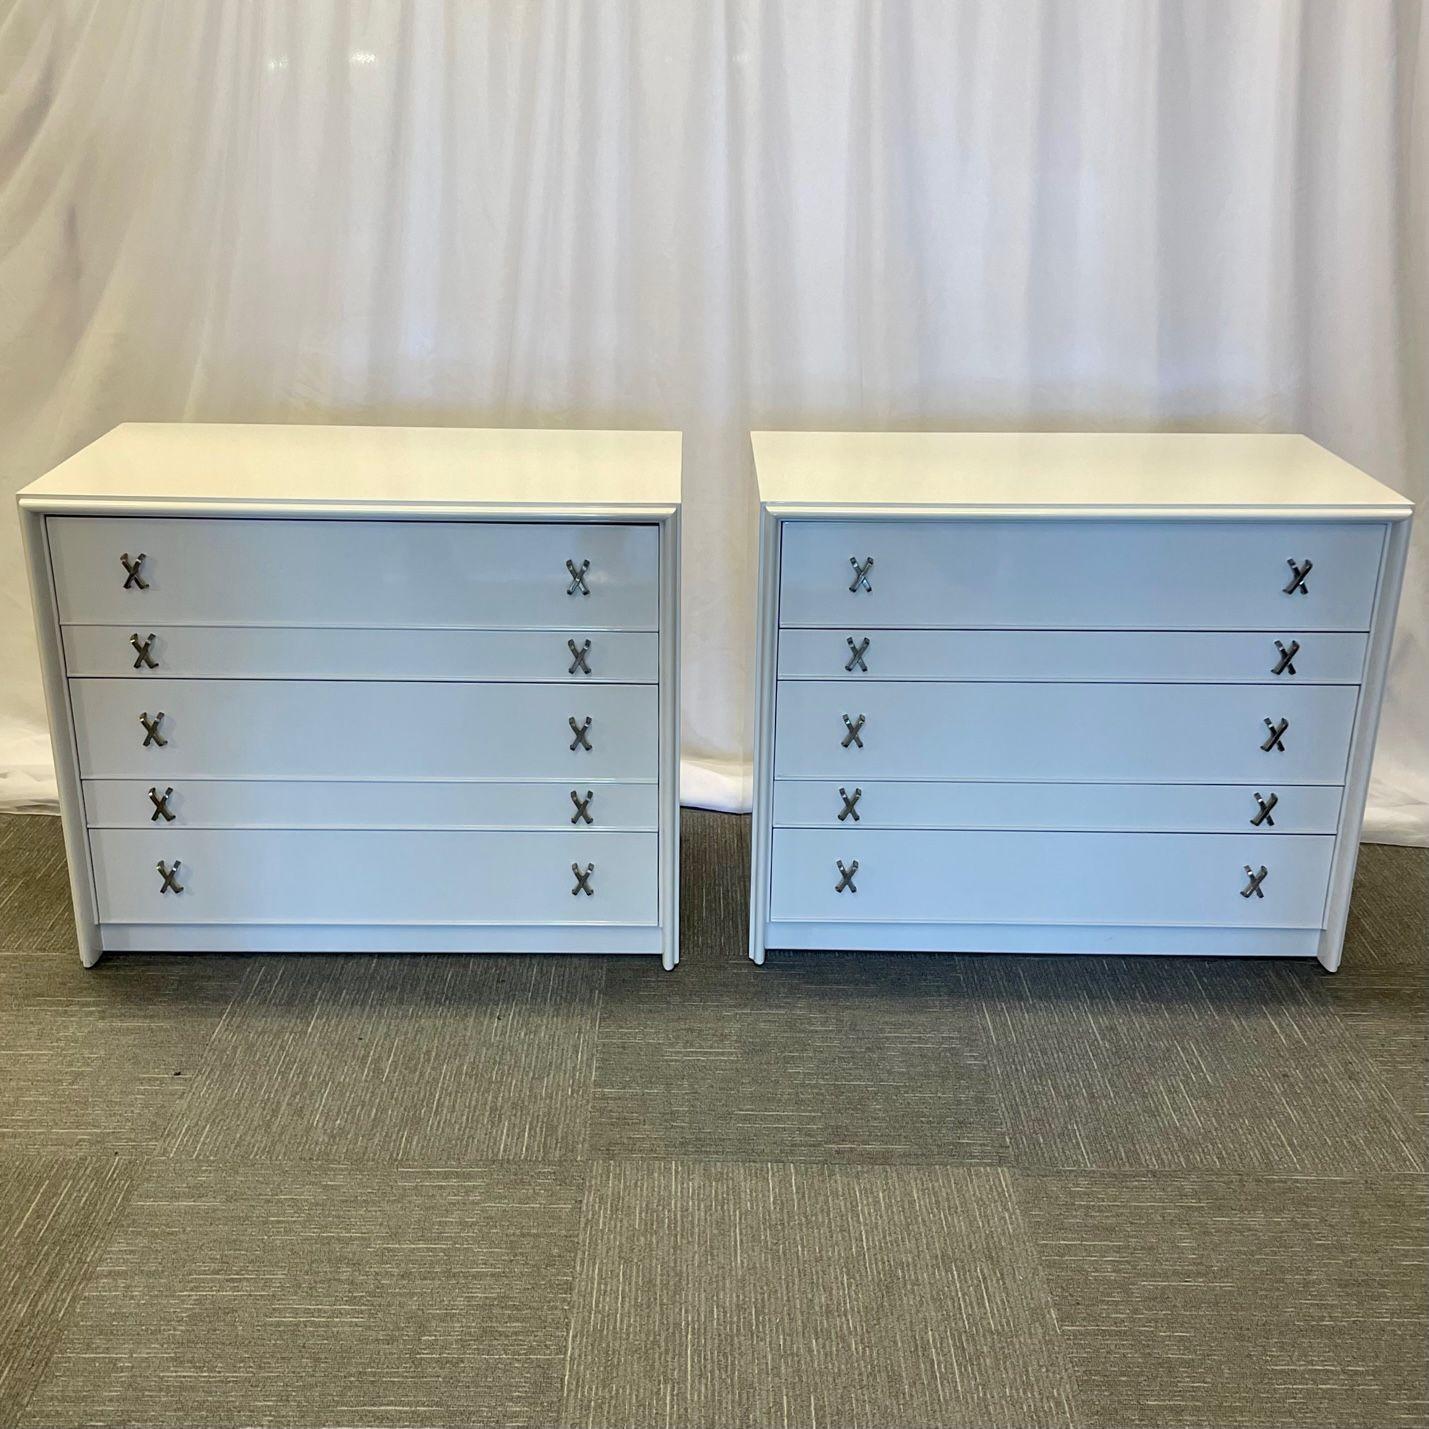 Pair Mid-Century Modern Dresser / Nightstands, Lacquer, Paul Frankl, John Stuart
Gorgeous pair of 20th Century bachelor chests newly refinished in a luxurious high gloss white lacquer. Each chest is very functional - having a total of 5 recessed